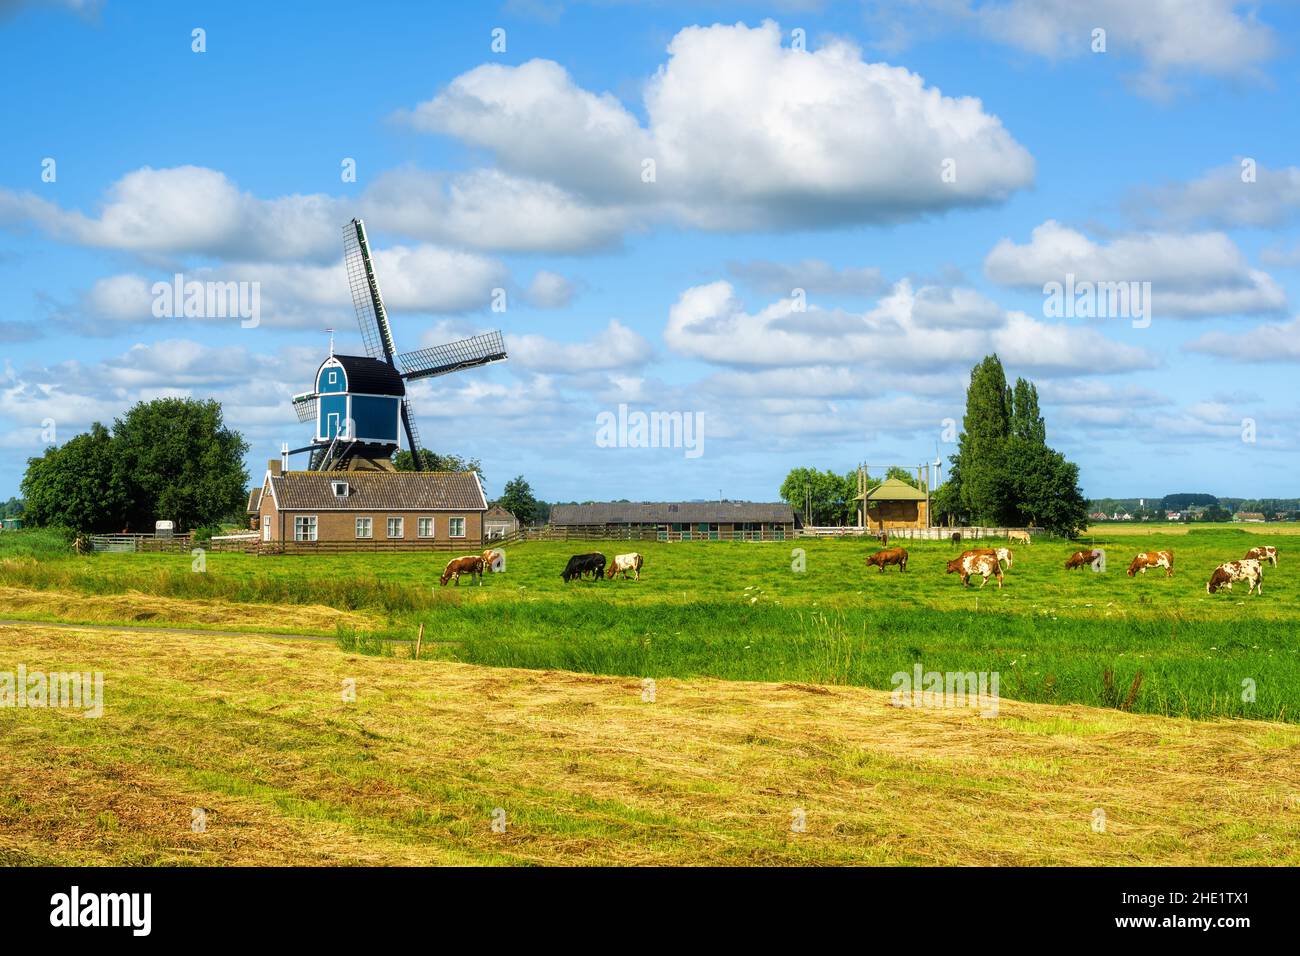 Dutch rural countryside landscape with a windmill and cows grassing on a field, South Holland, Netherlands Stock Photo